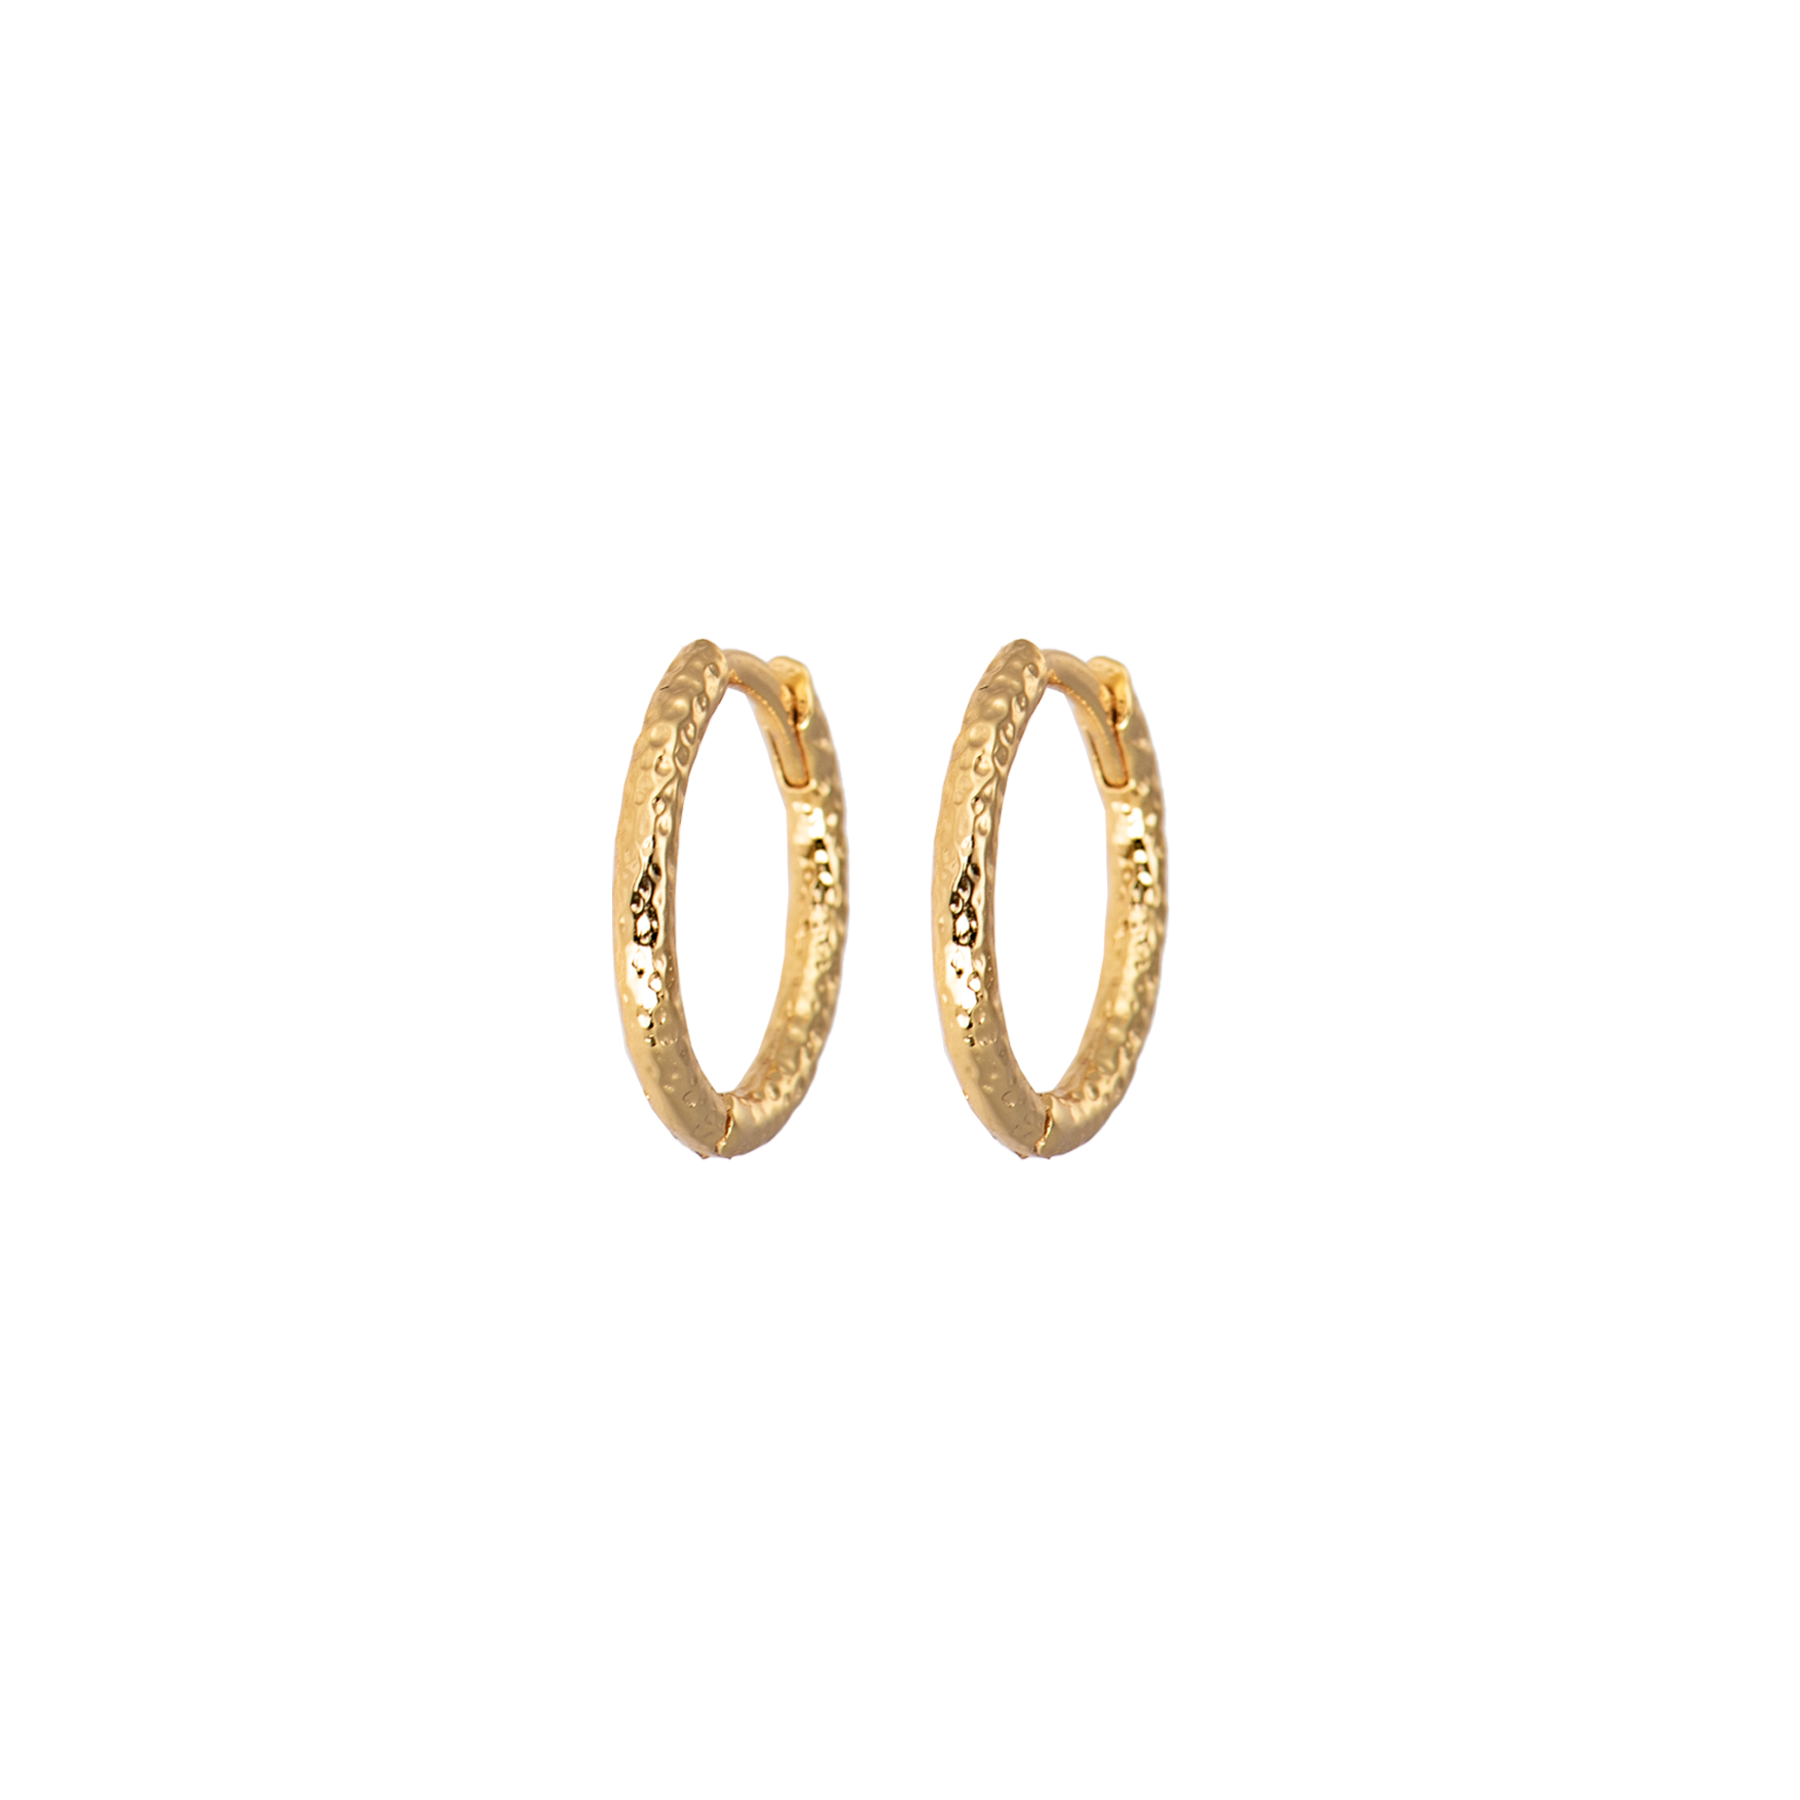 Image of Small hammered gold hoops from Emilia by Bon Dep